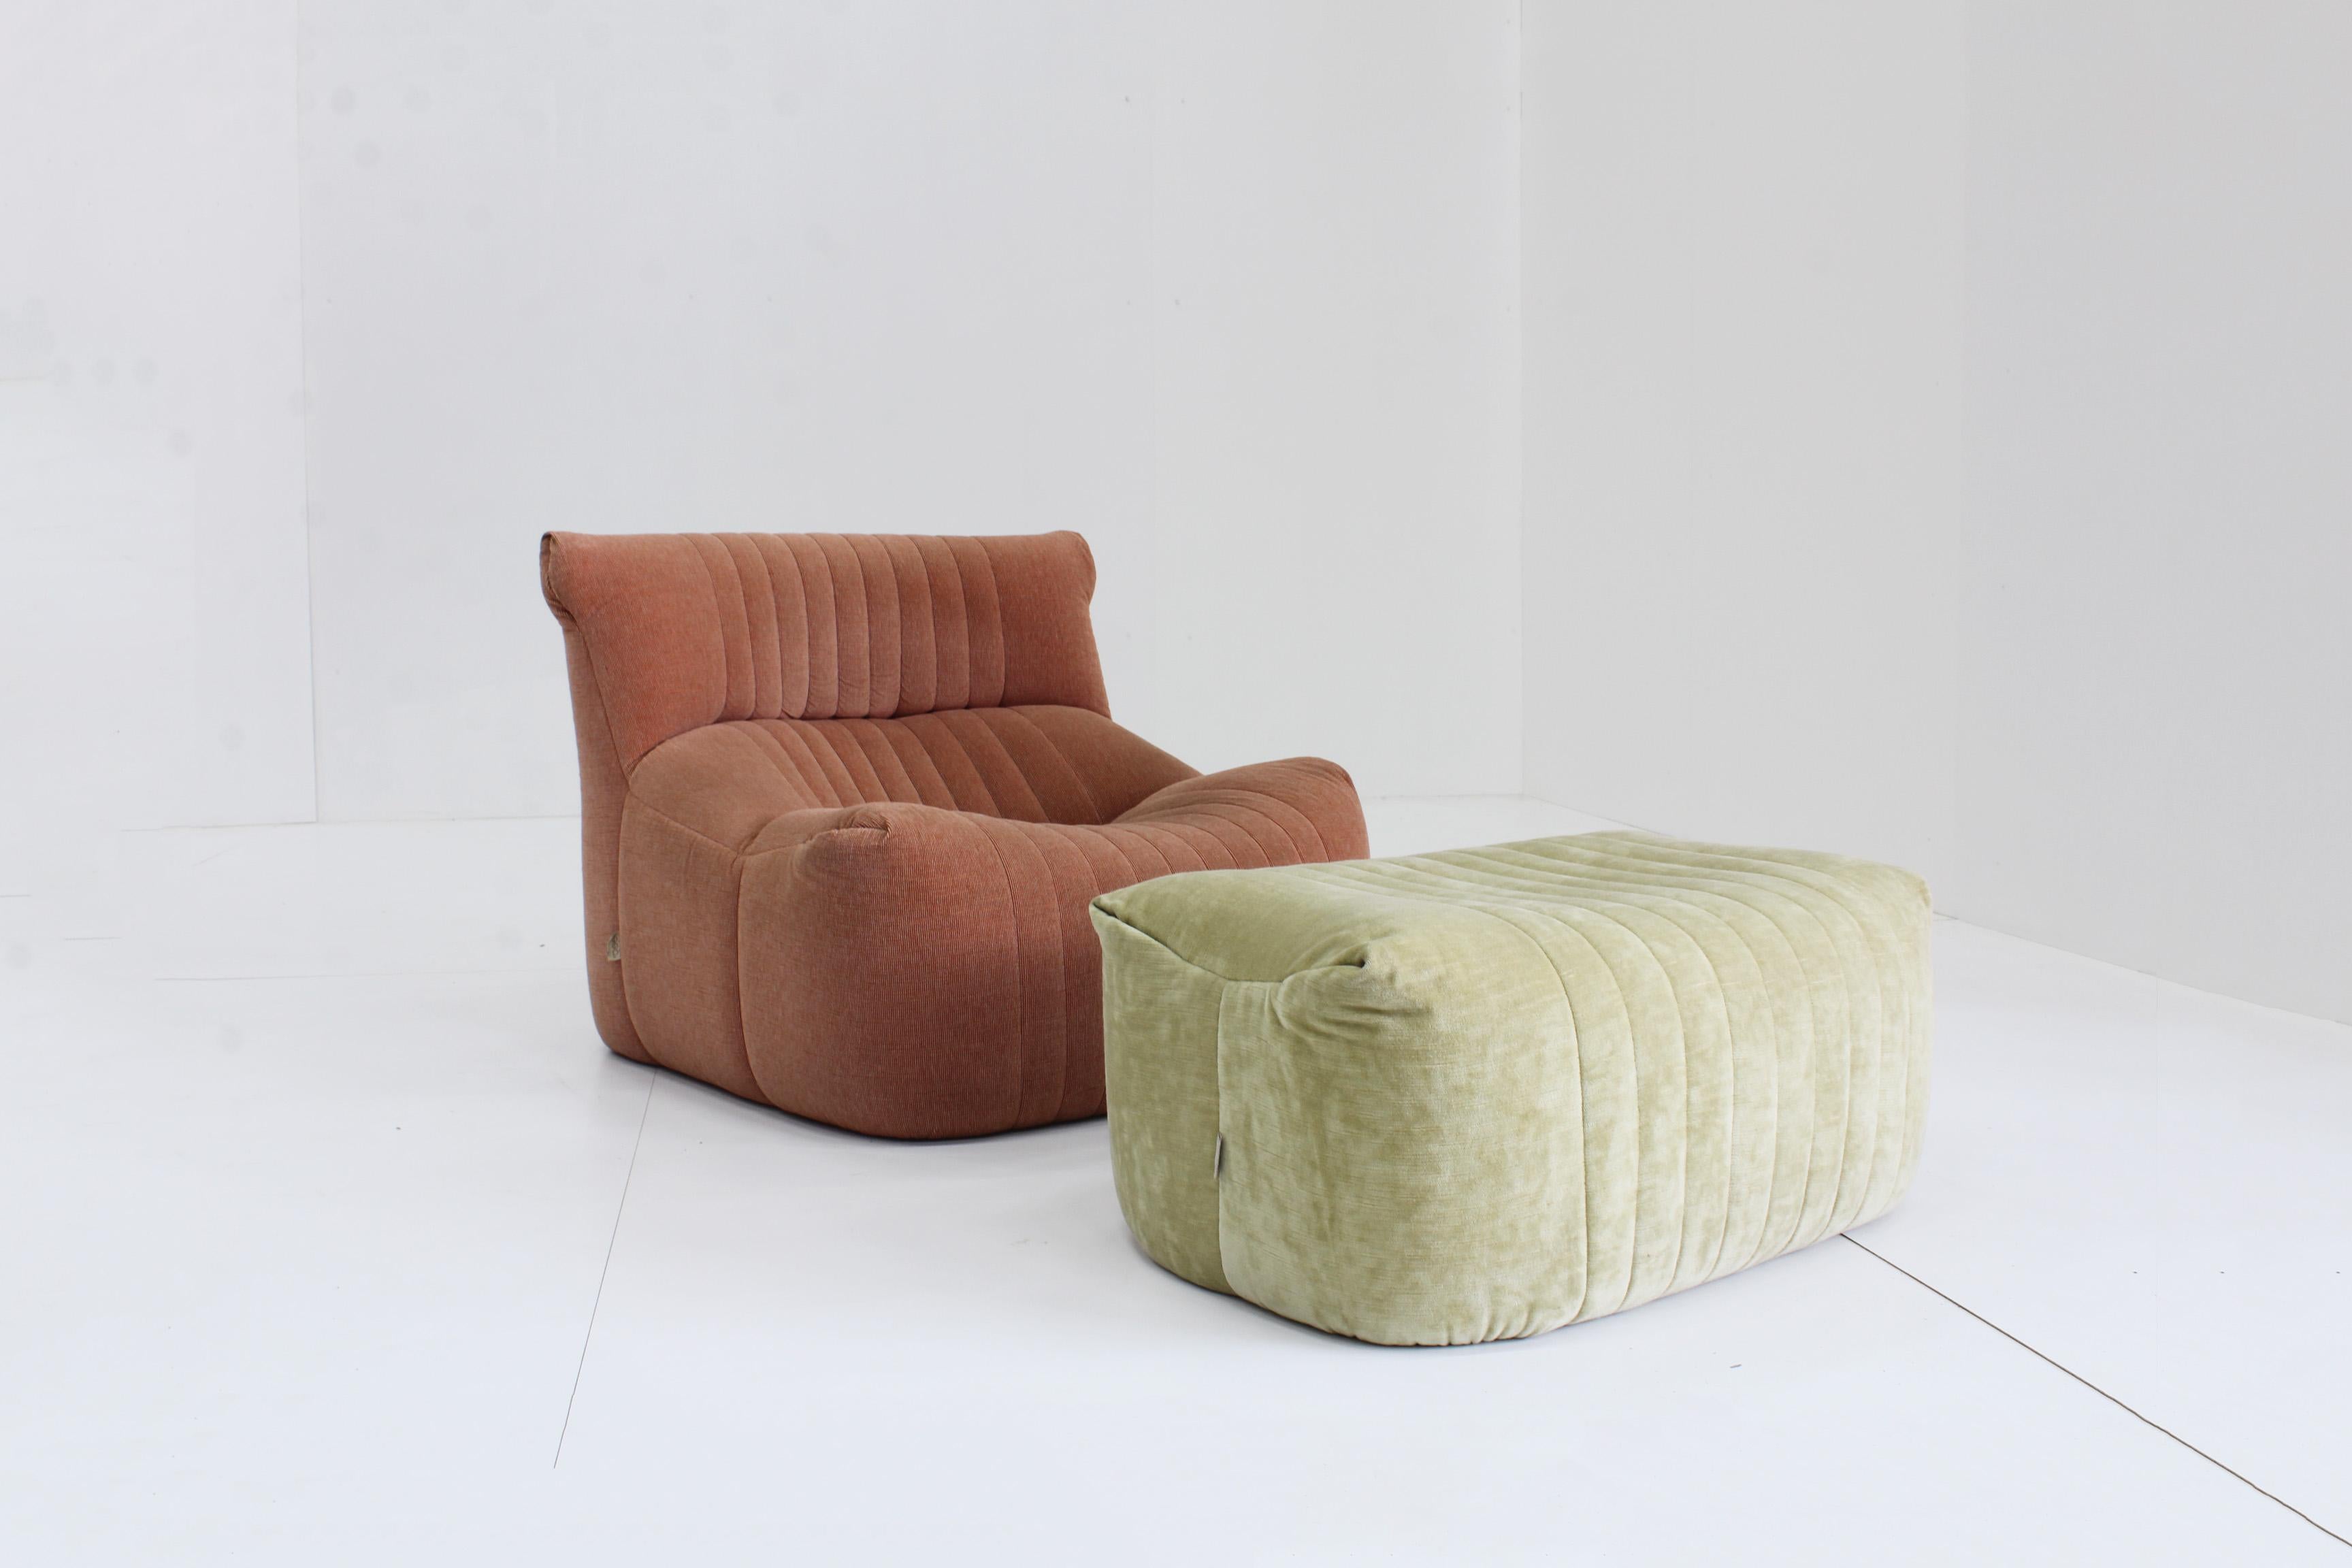 Aralia armchair and ottoman designed by Michel Ducaroy for Ligne Roset in the 1980s. This french design piece is in a good vintage condition. Colourful combination of the armchair and ottoman. Perfect to match with colors like brown, grey or yellow.